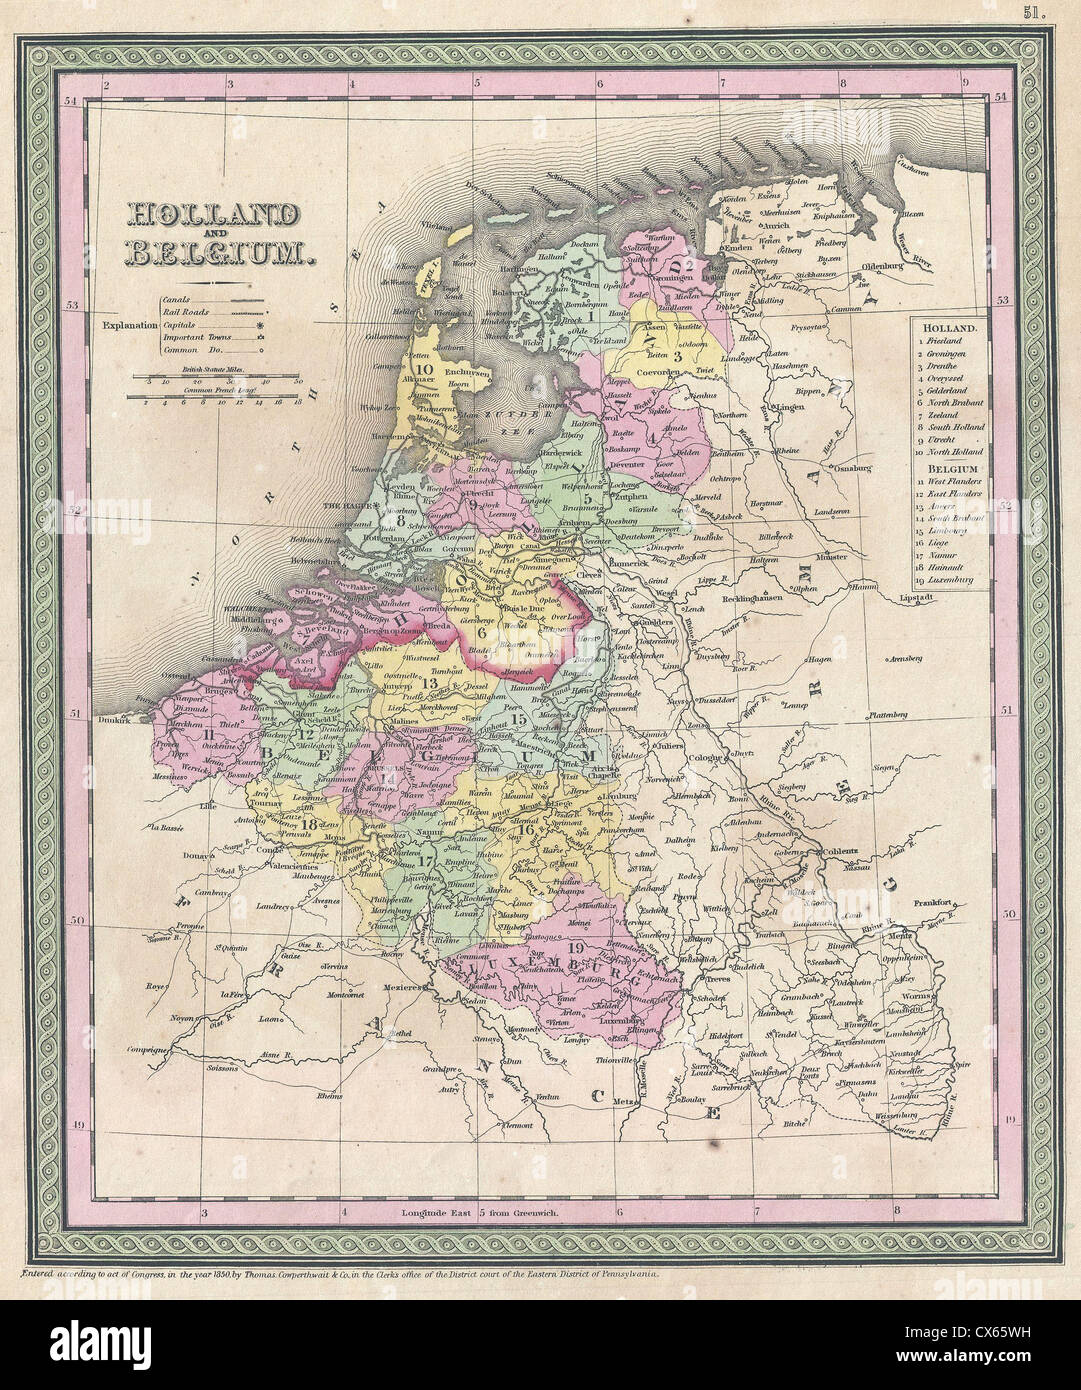 1850 Mitchell Map of Holland and Belgium Stock Photo